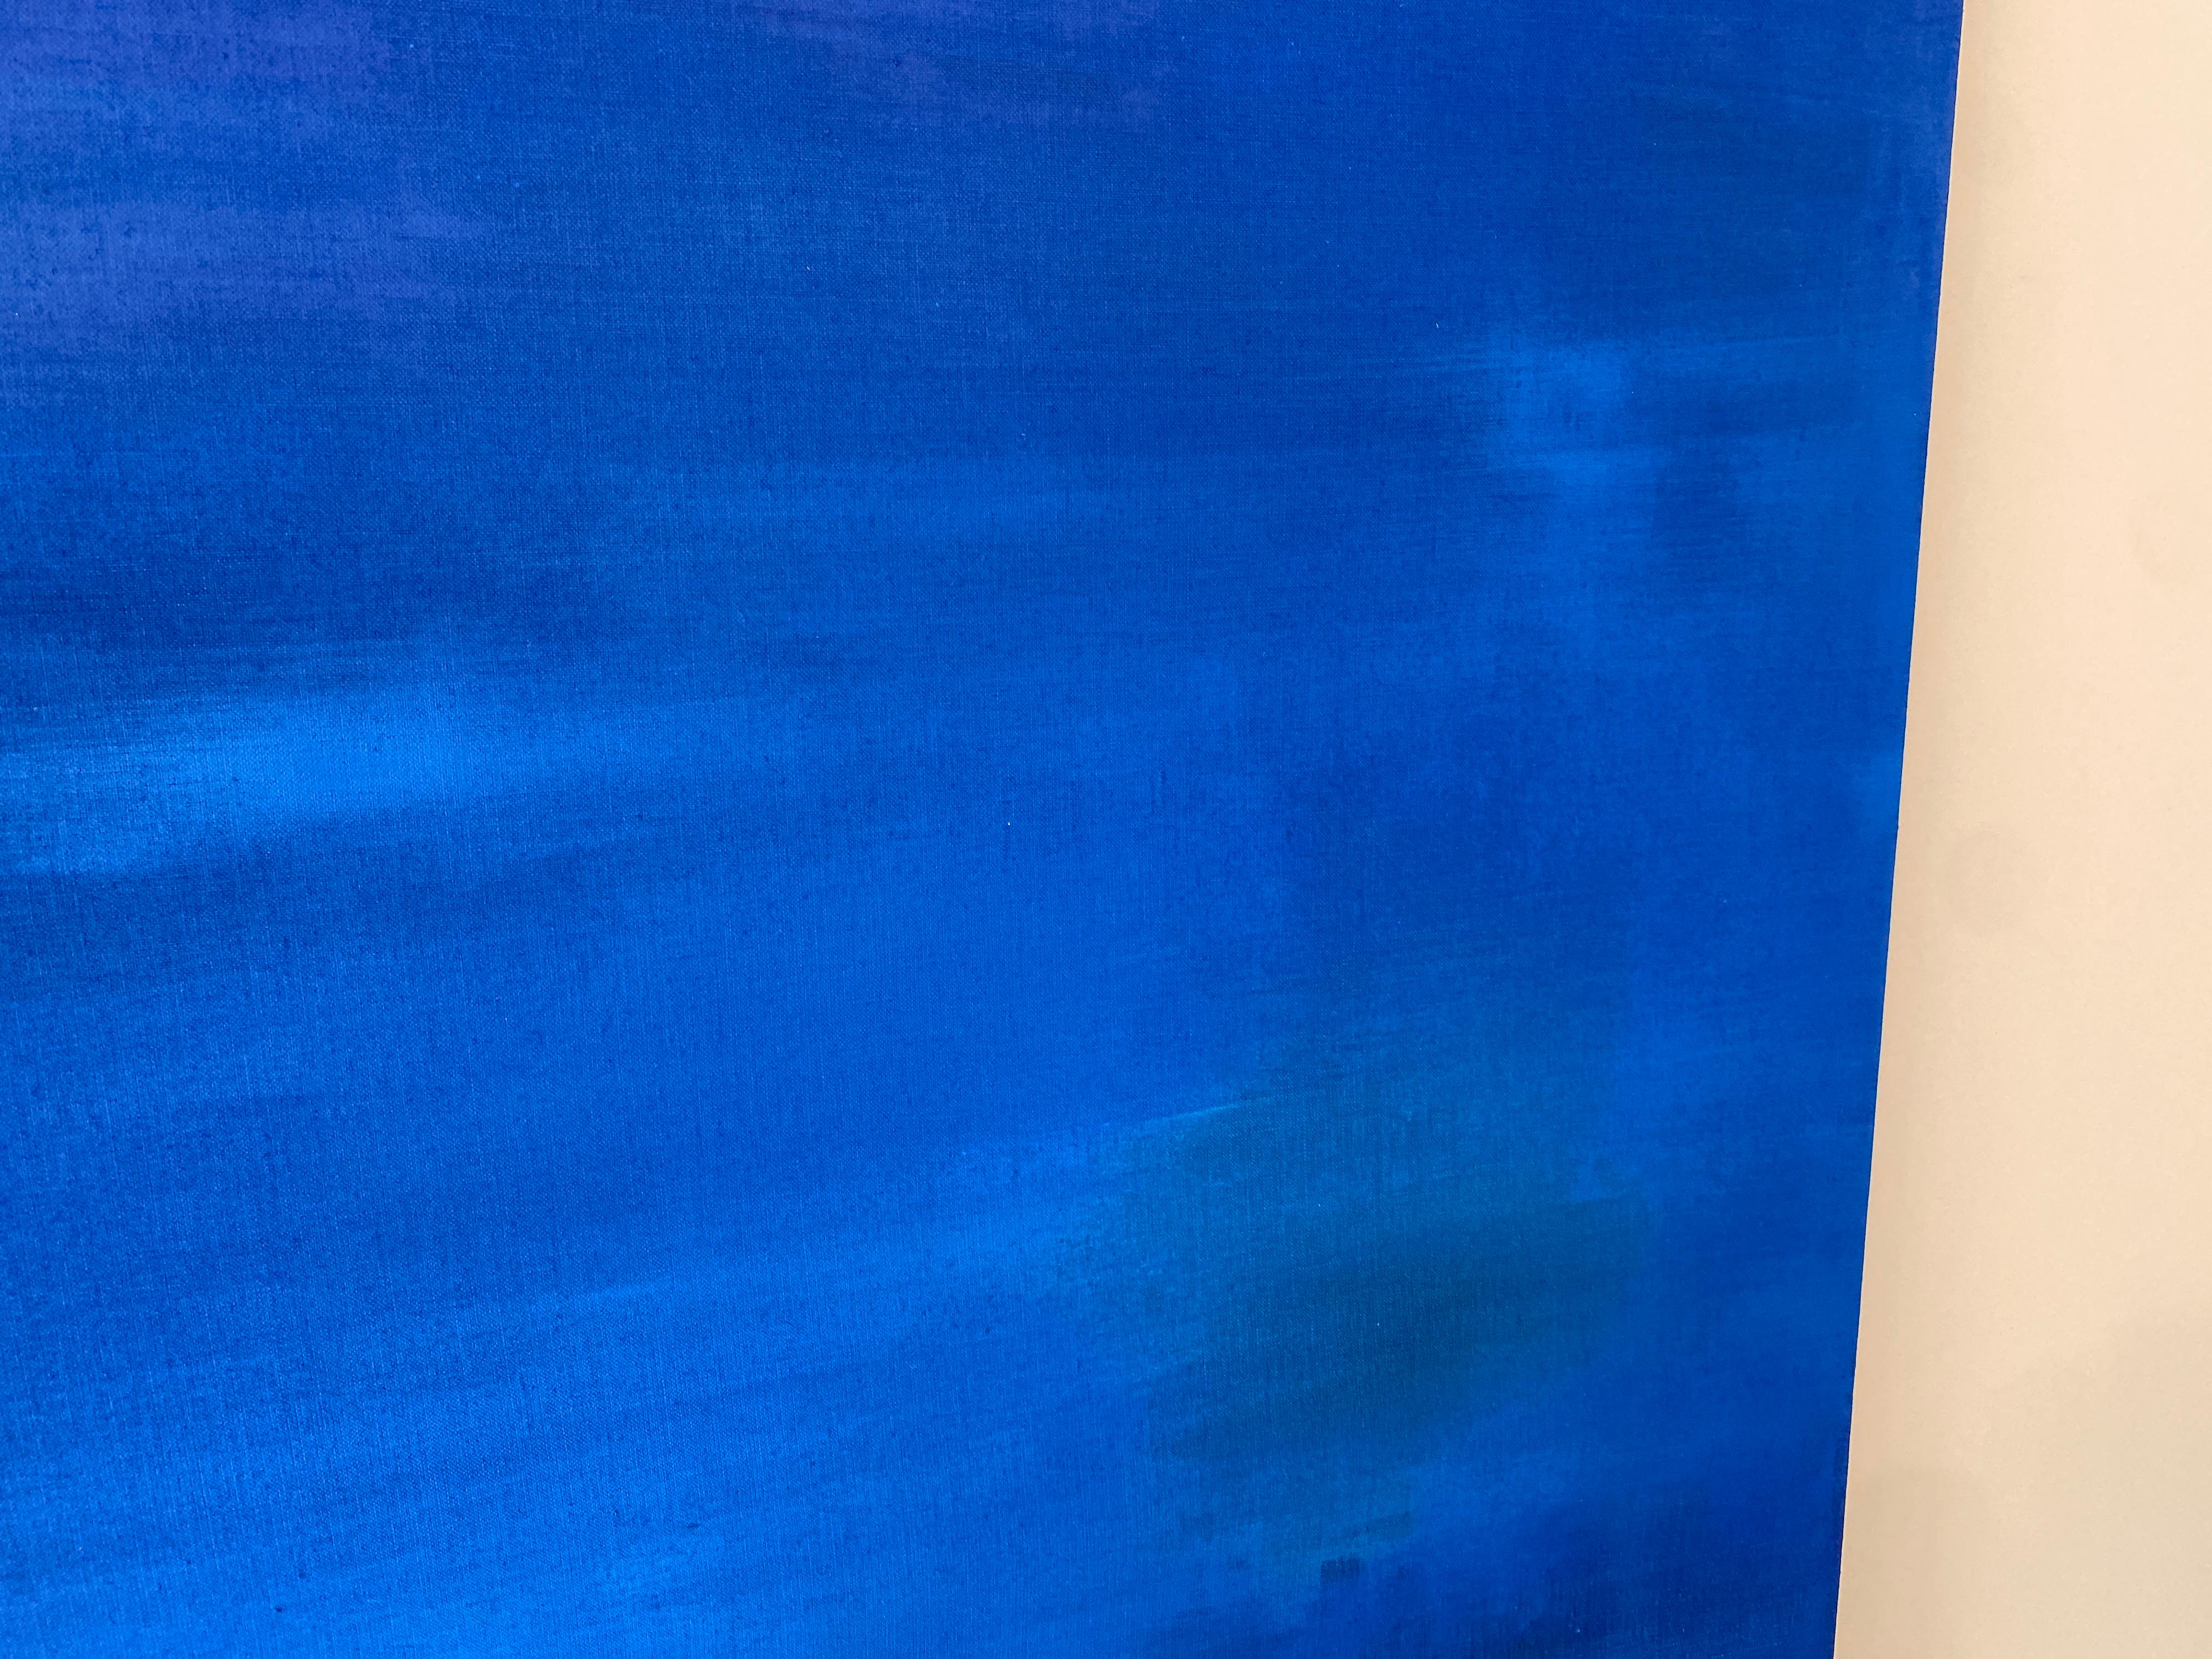 Big Blue cobalt large scale minimalist abstract painting statement artwork For Sale 15